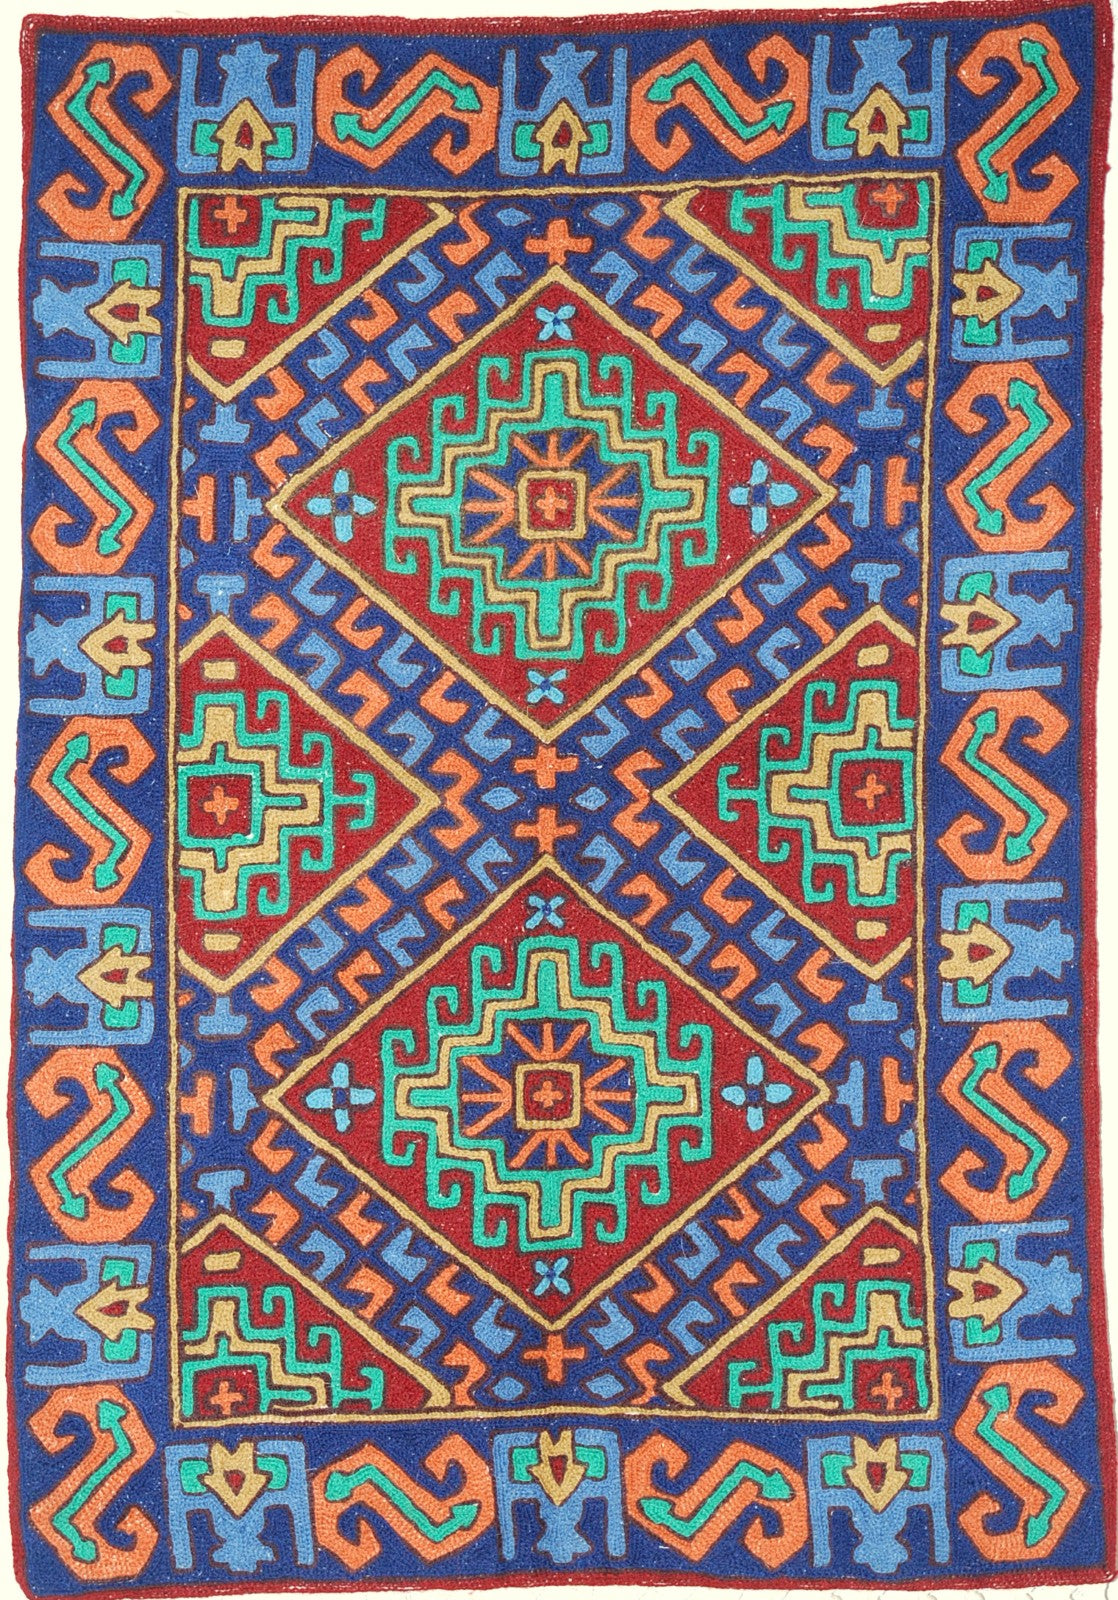 ChainStitch Tapestry Woolen Area Rug, Multicolor Embroidery 2x3 feet # -  Best of Kashmir